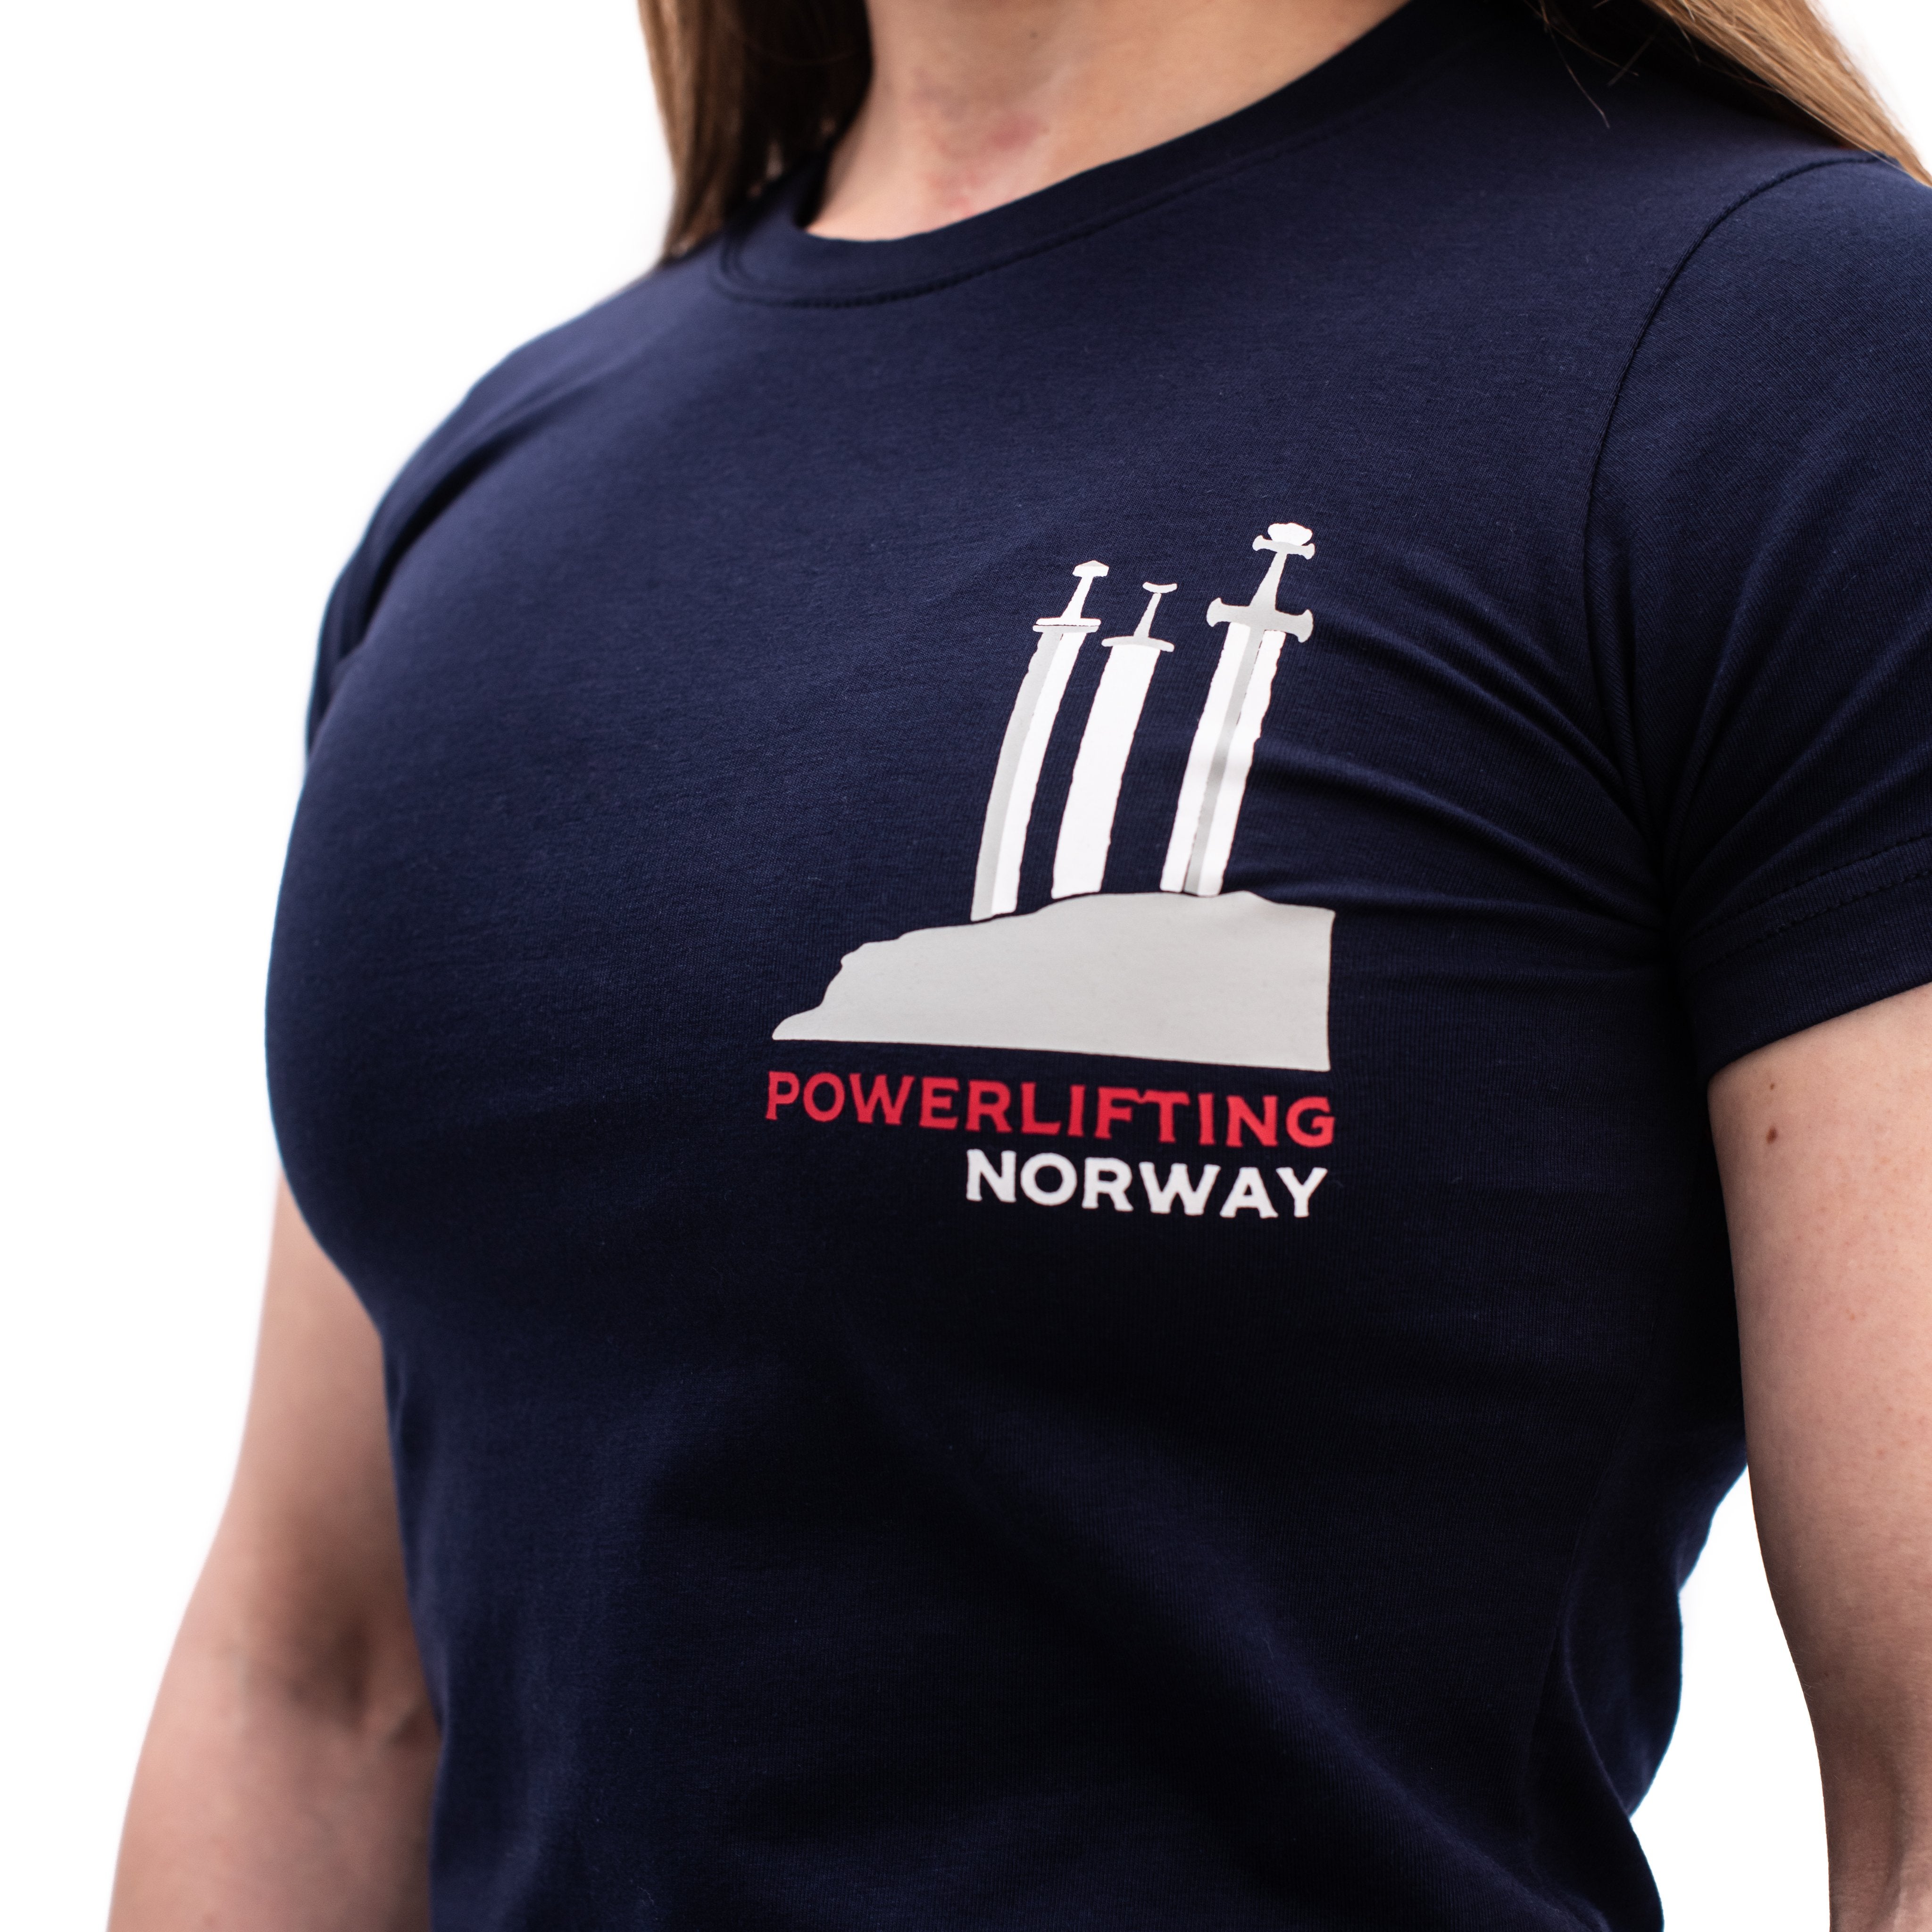 A7 Norway Swords Bar Grip T-shirt, great as a squat shirt. Purchase Norway Swords Bar Grip tshirt UK from A7 UK. Purchase Norway Swords Bar Grip Shirt in Europe from A7 UK. No more chalk and no more sliding. Best Bar Grip Tshirts, shipping to UK and Europe from A7 UK. A7 Norway Swords is our classic black on black shirt design! The best Powerlifting apparel for all your workouts. Available in UK and Europe including France, Italy, Germany, Sweden, Norway and Poland